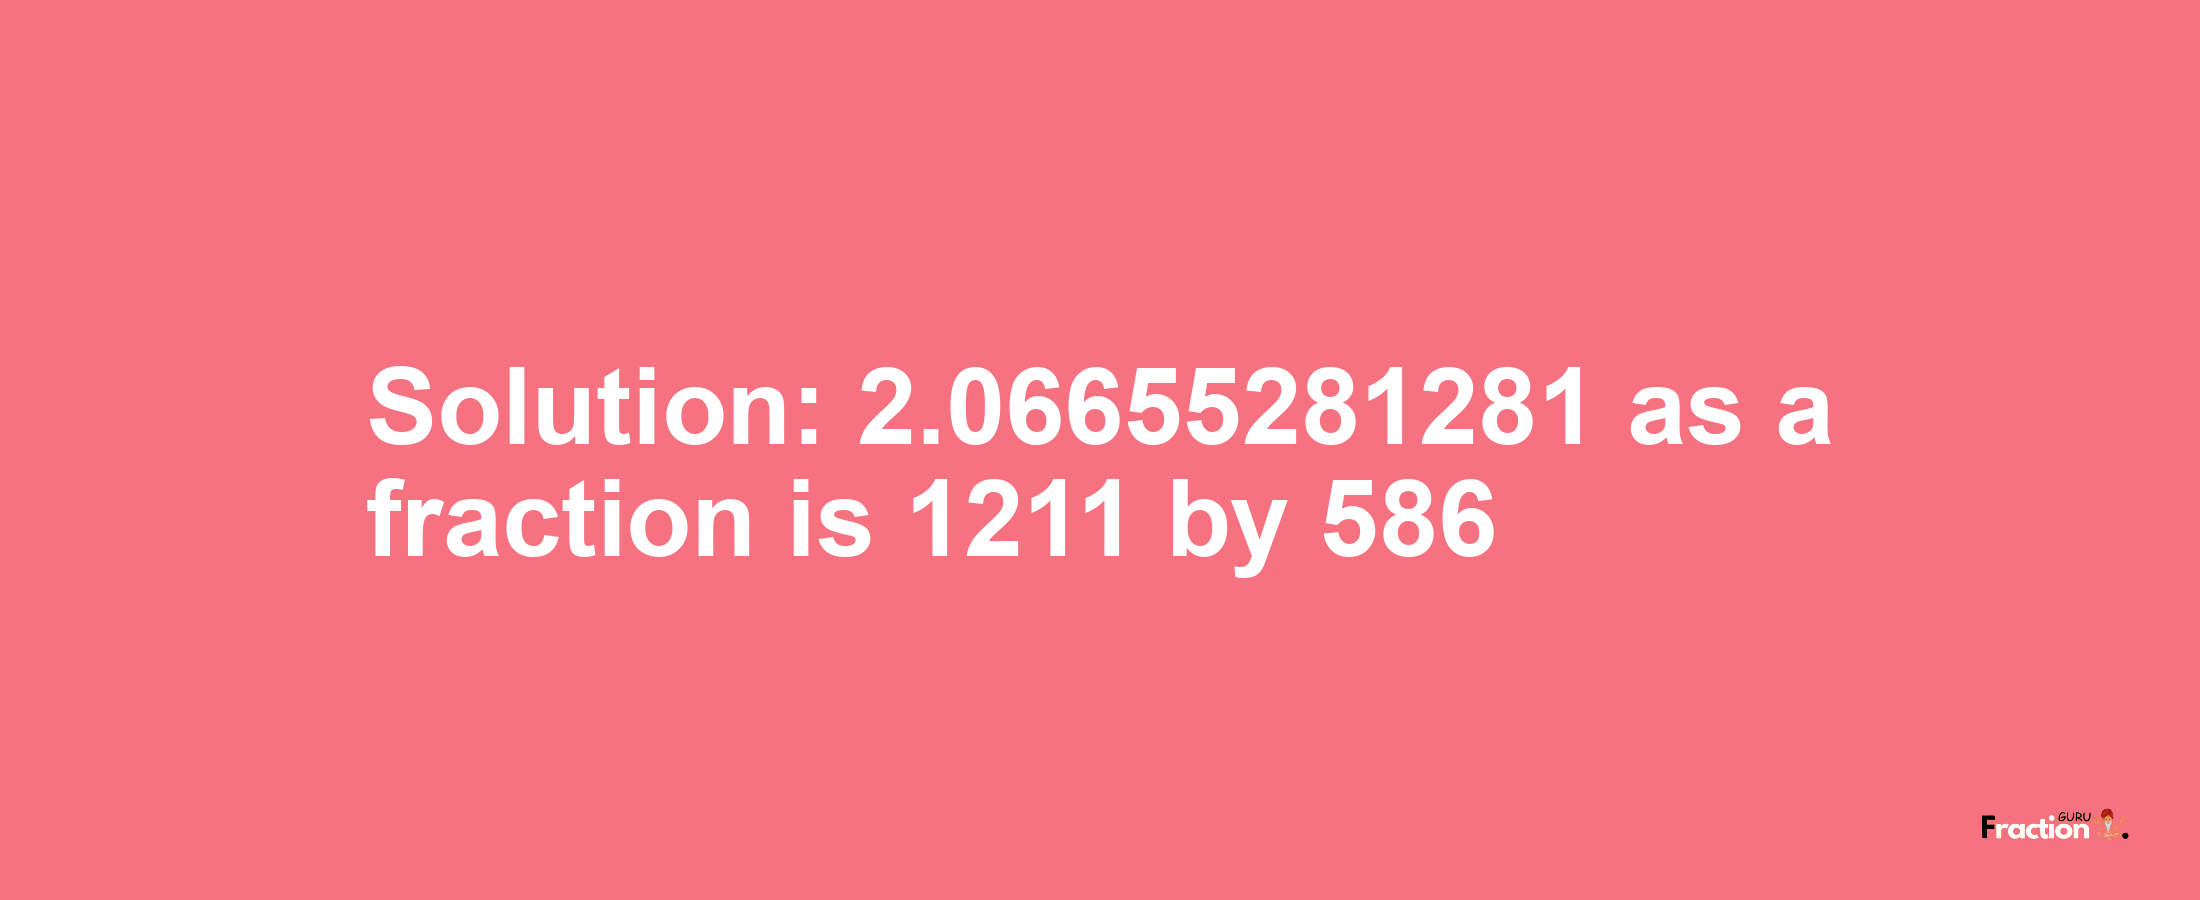 Solution:2.06655281281 as a fraction is 1211/586